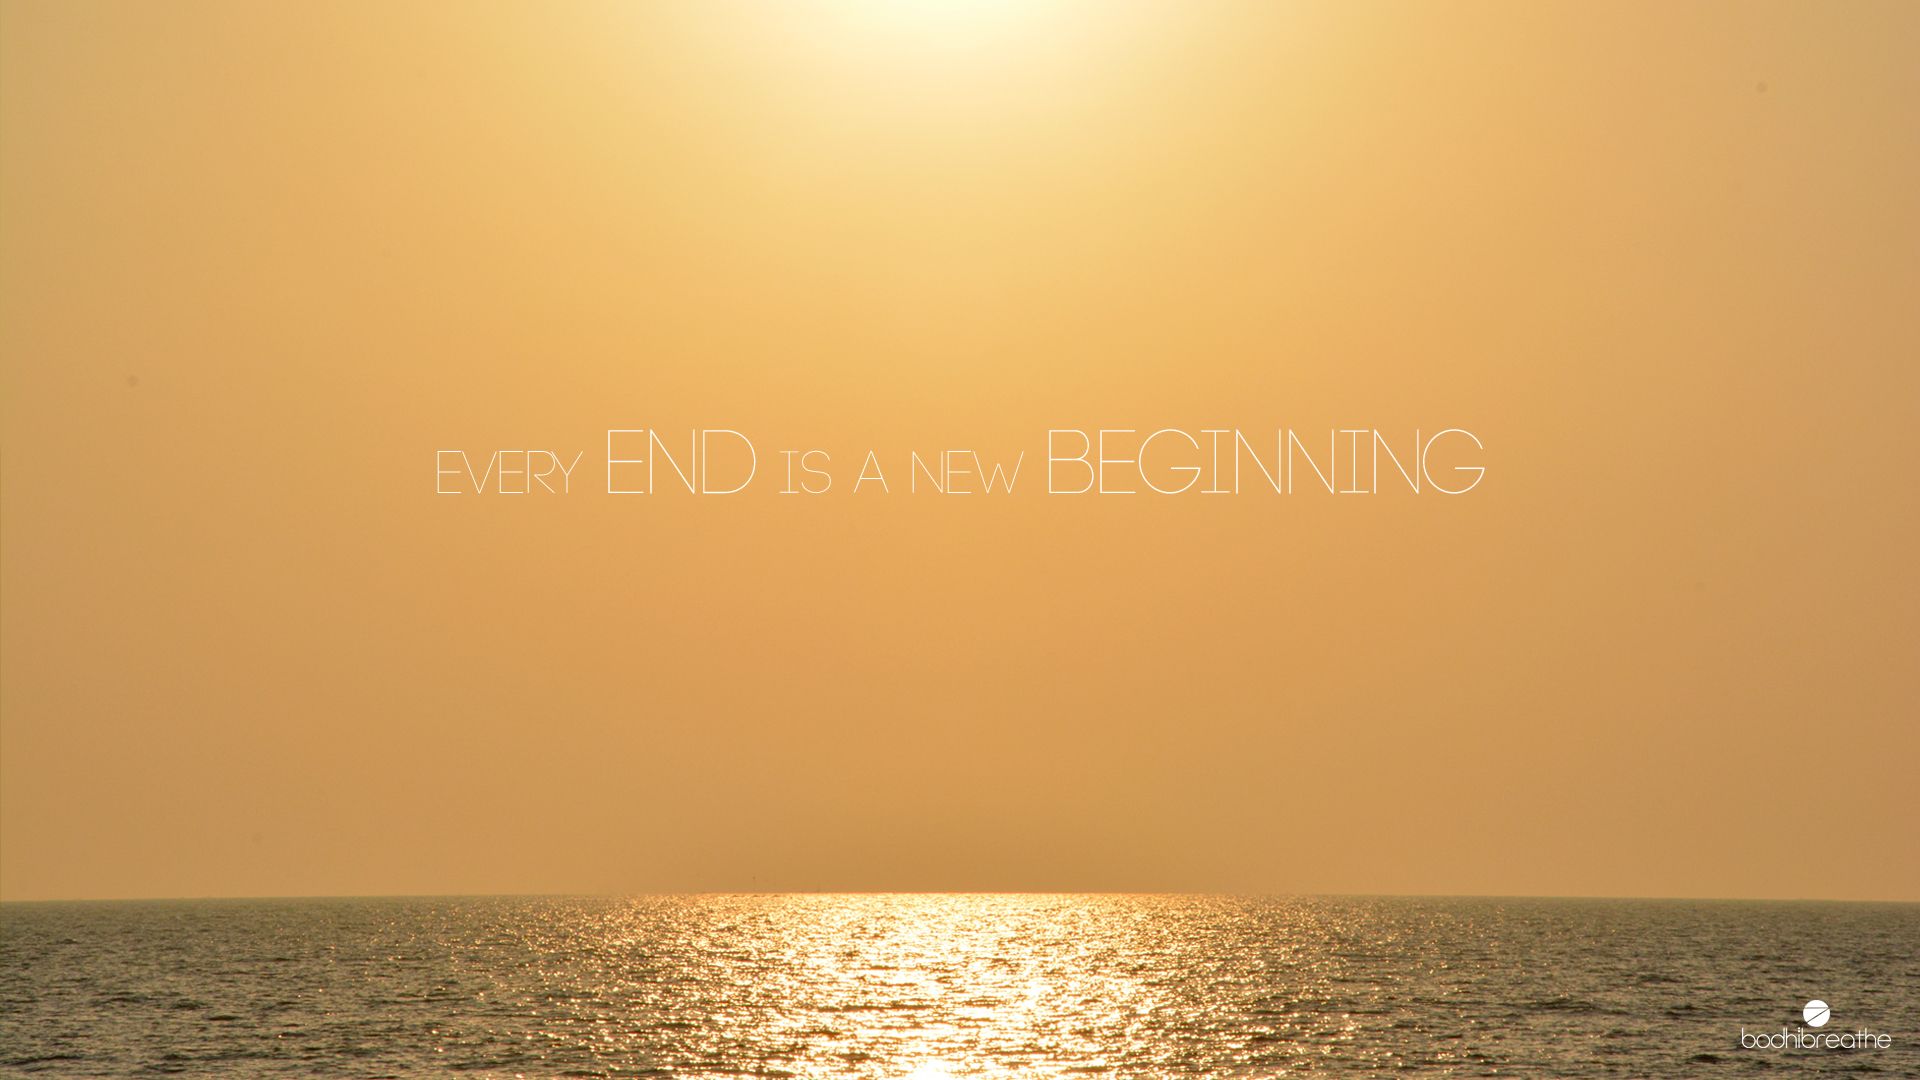 Every End is a New Beginning. High quality wallpaper, Free wallpaper, New beginnings